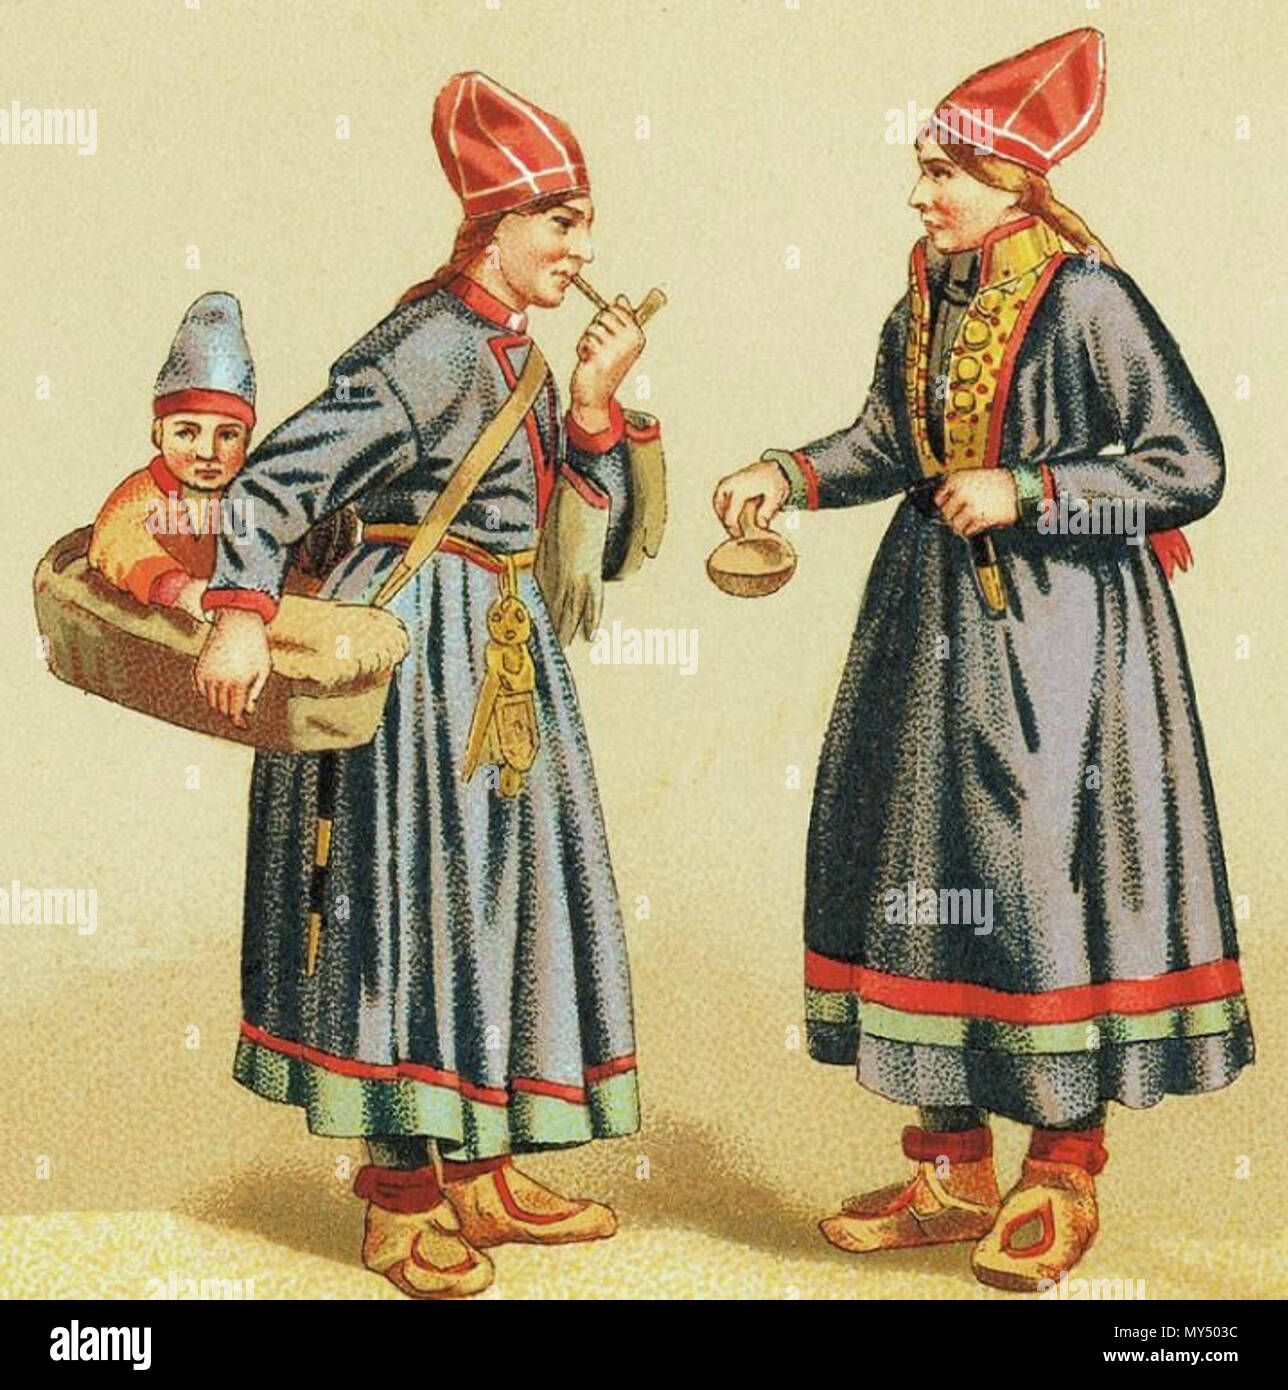 . English: A painting of Sami women in traditional garments (costumes) with a child in Komse or child carrier. Lapland, Sweden. Search words: Saami, Samisk, Collars, Sapmi, silver, Barmklede, Bärmkläde, Brystklede, Kolt, Kofte, Gakti, Samisk sølv. Read more in Saamiblog: http://saamiblog.blogspot.com/ . 1880. This file is lacking author information. 471 Sami women child costumes Sweden 1880 Stock Photo